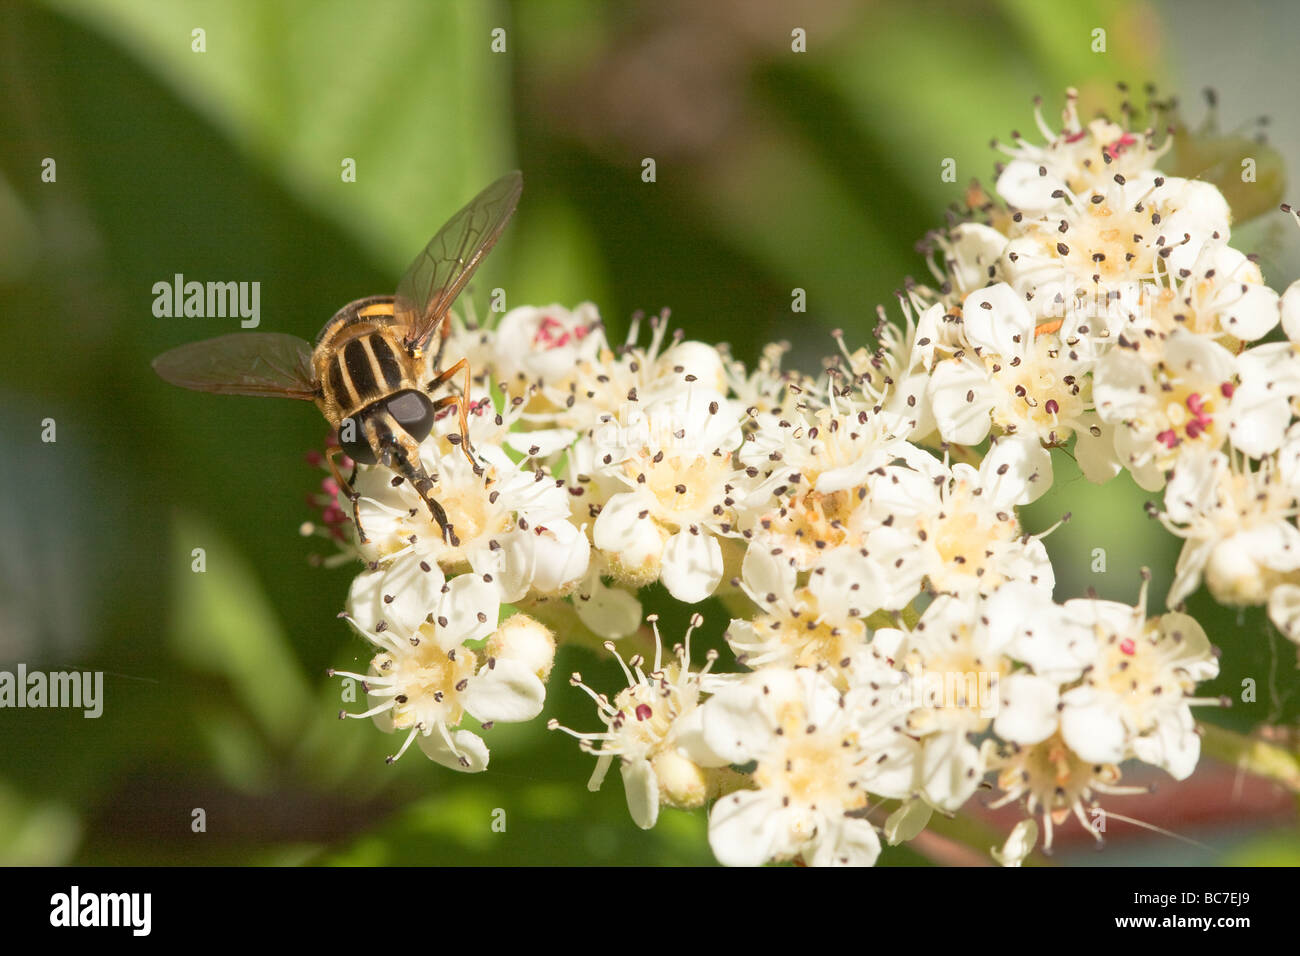 European Hoverfly Helophilus pendulus collecting nectar. Stock Photo